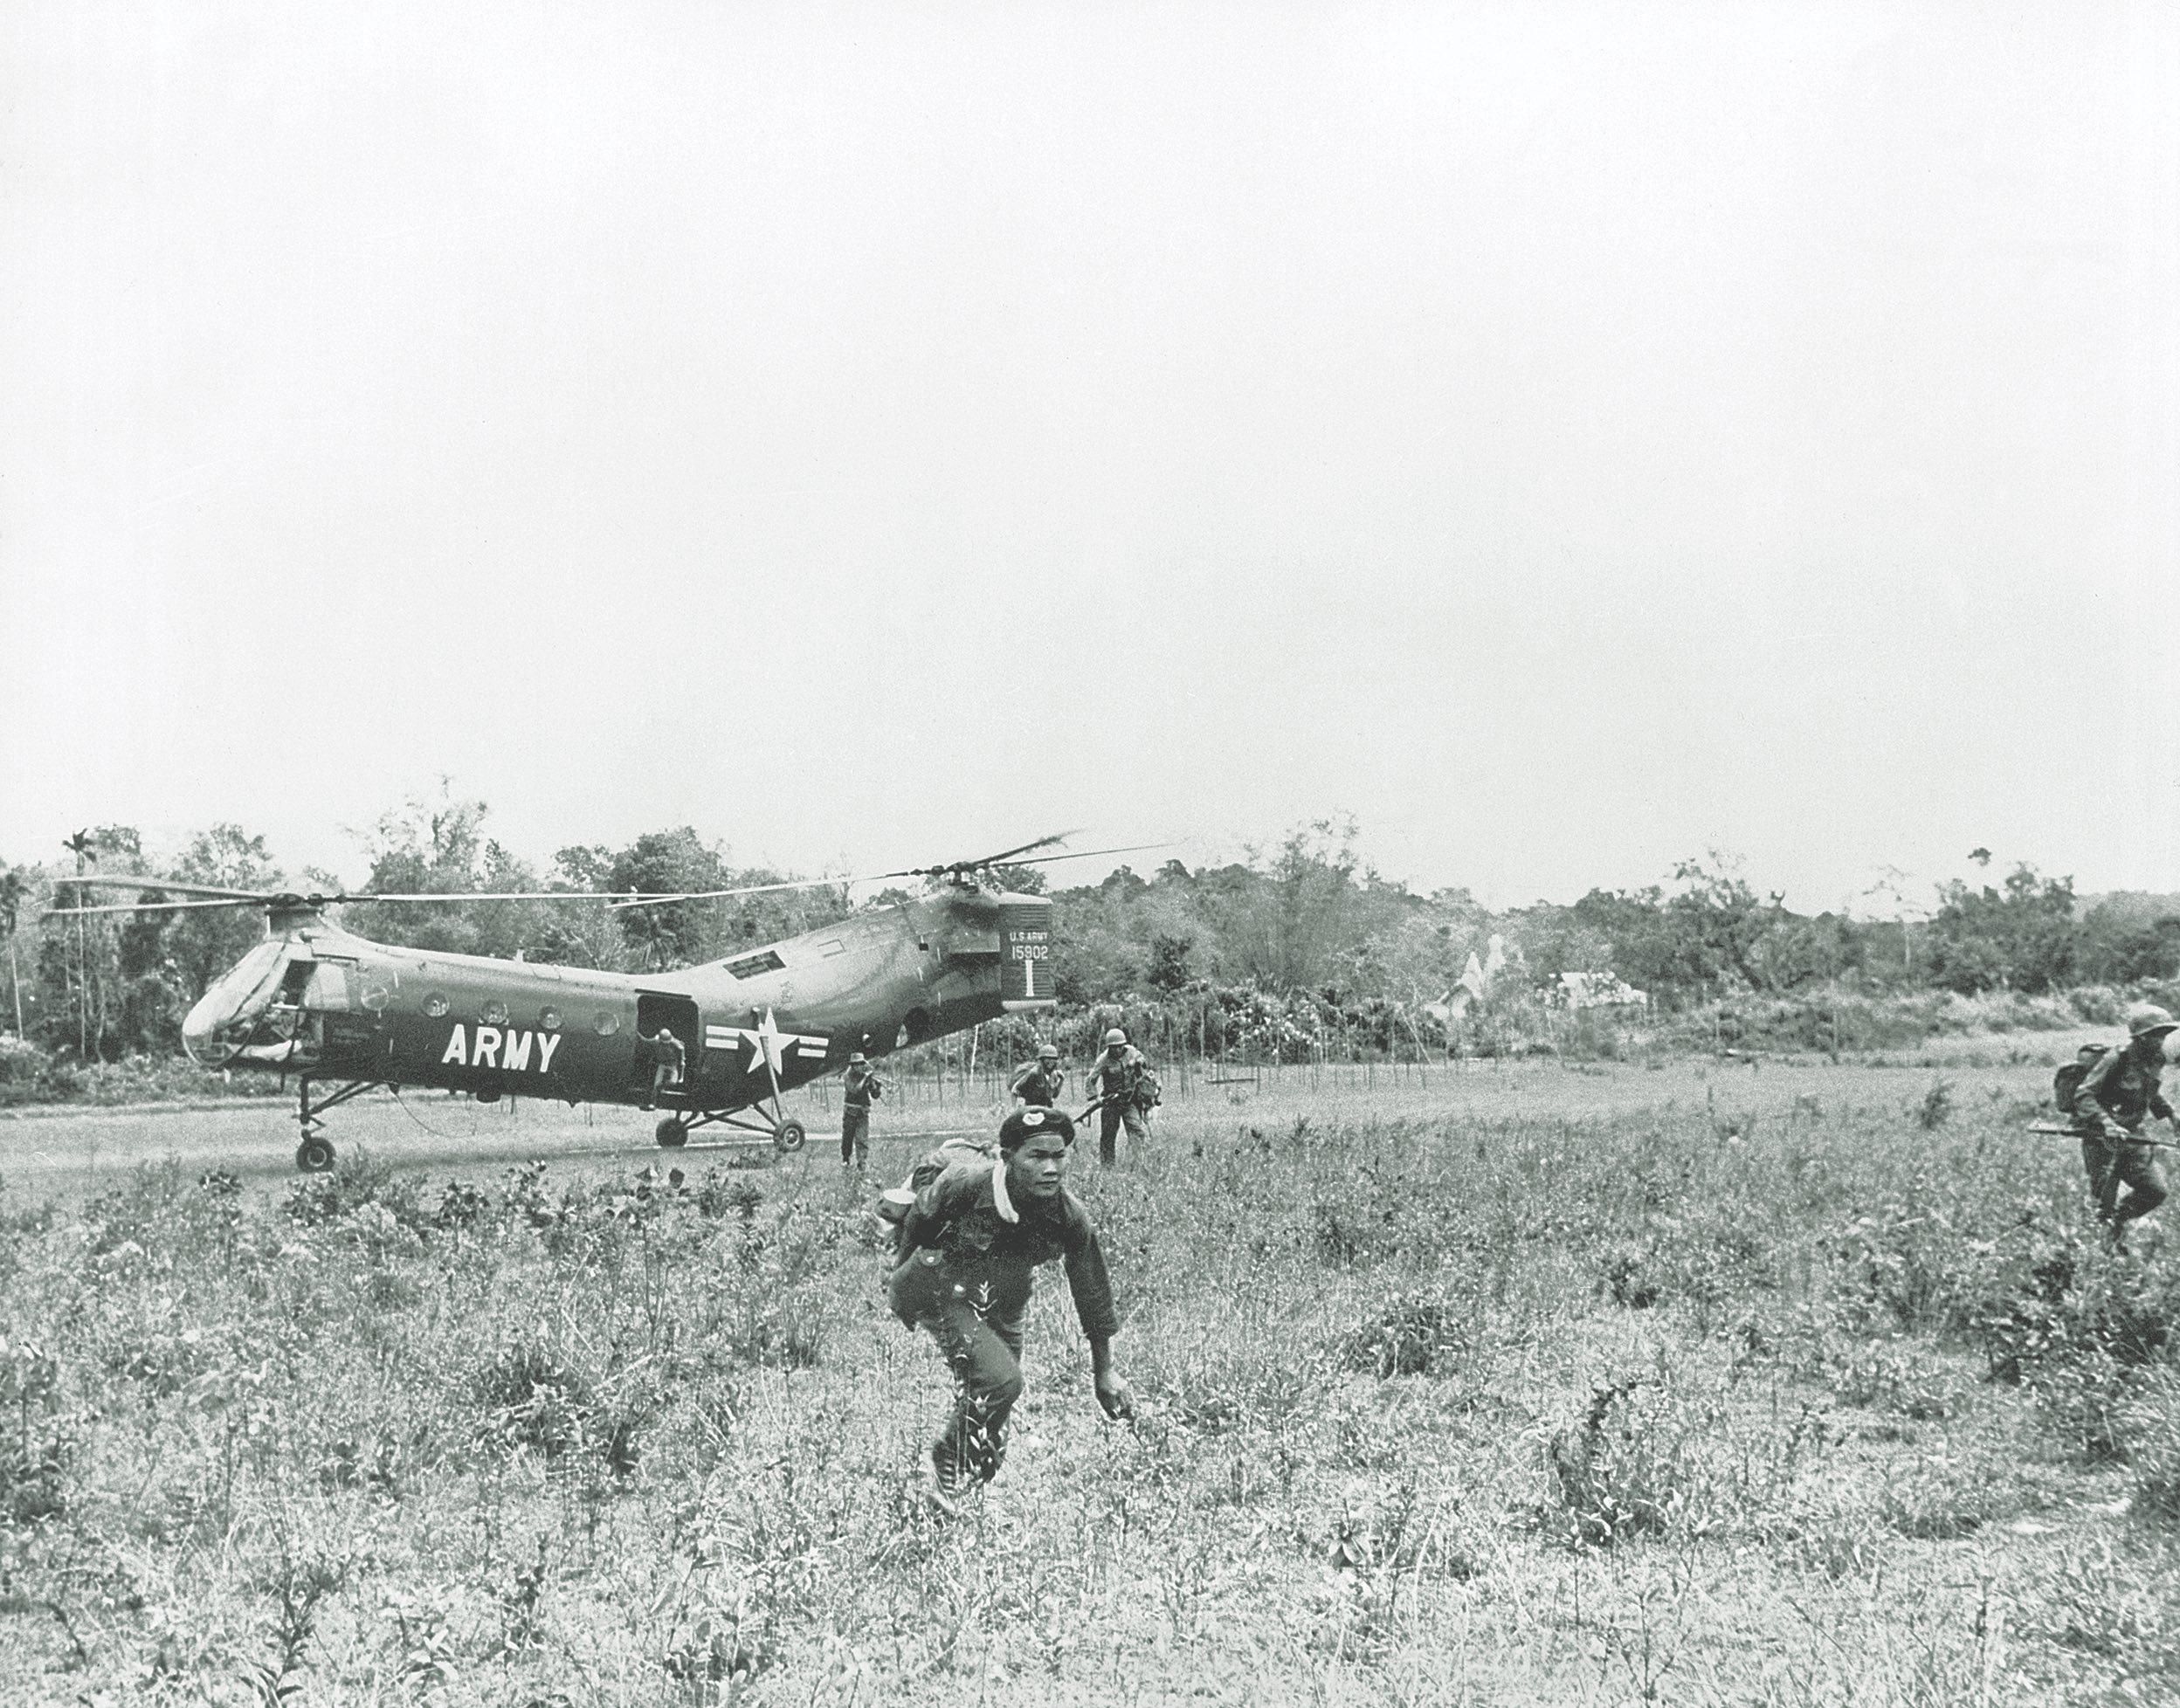 South Vietnamese soldiers move out from a landing zone in search of Viet Cong 1962 / Getty Images